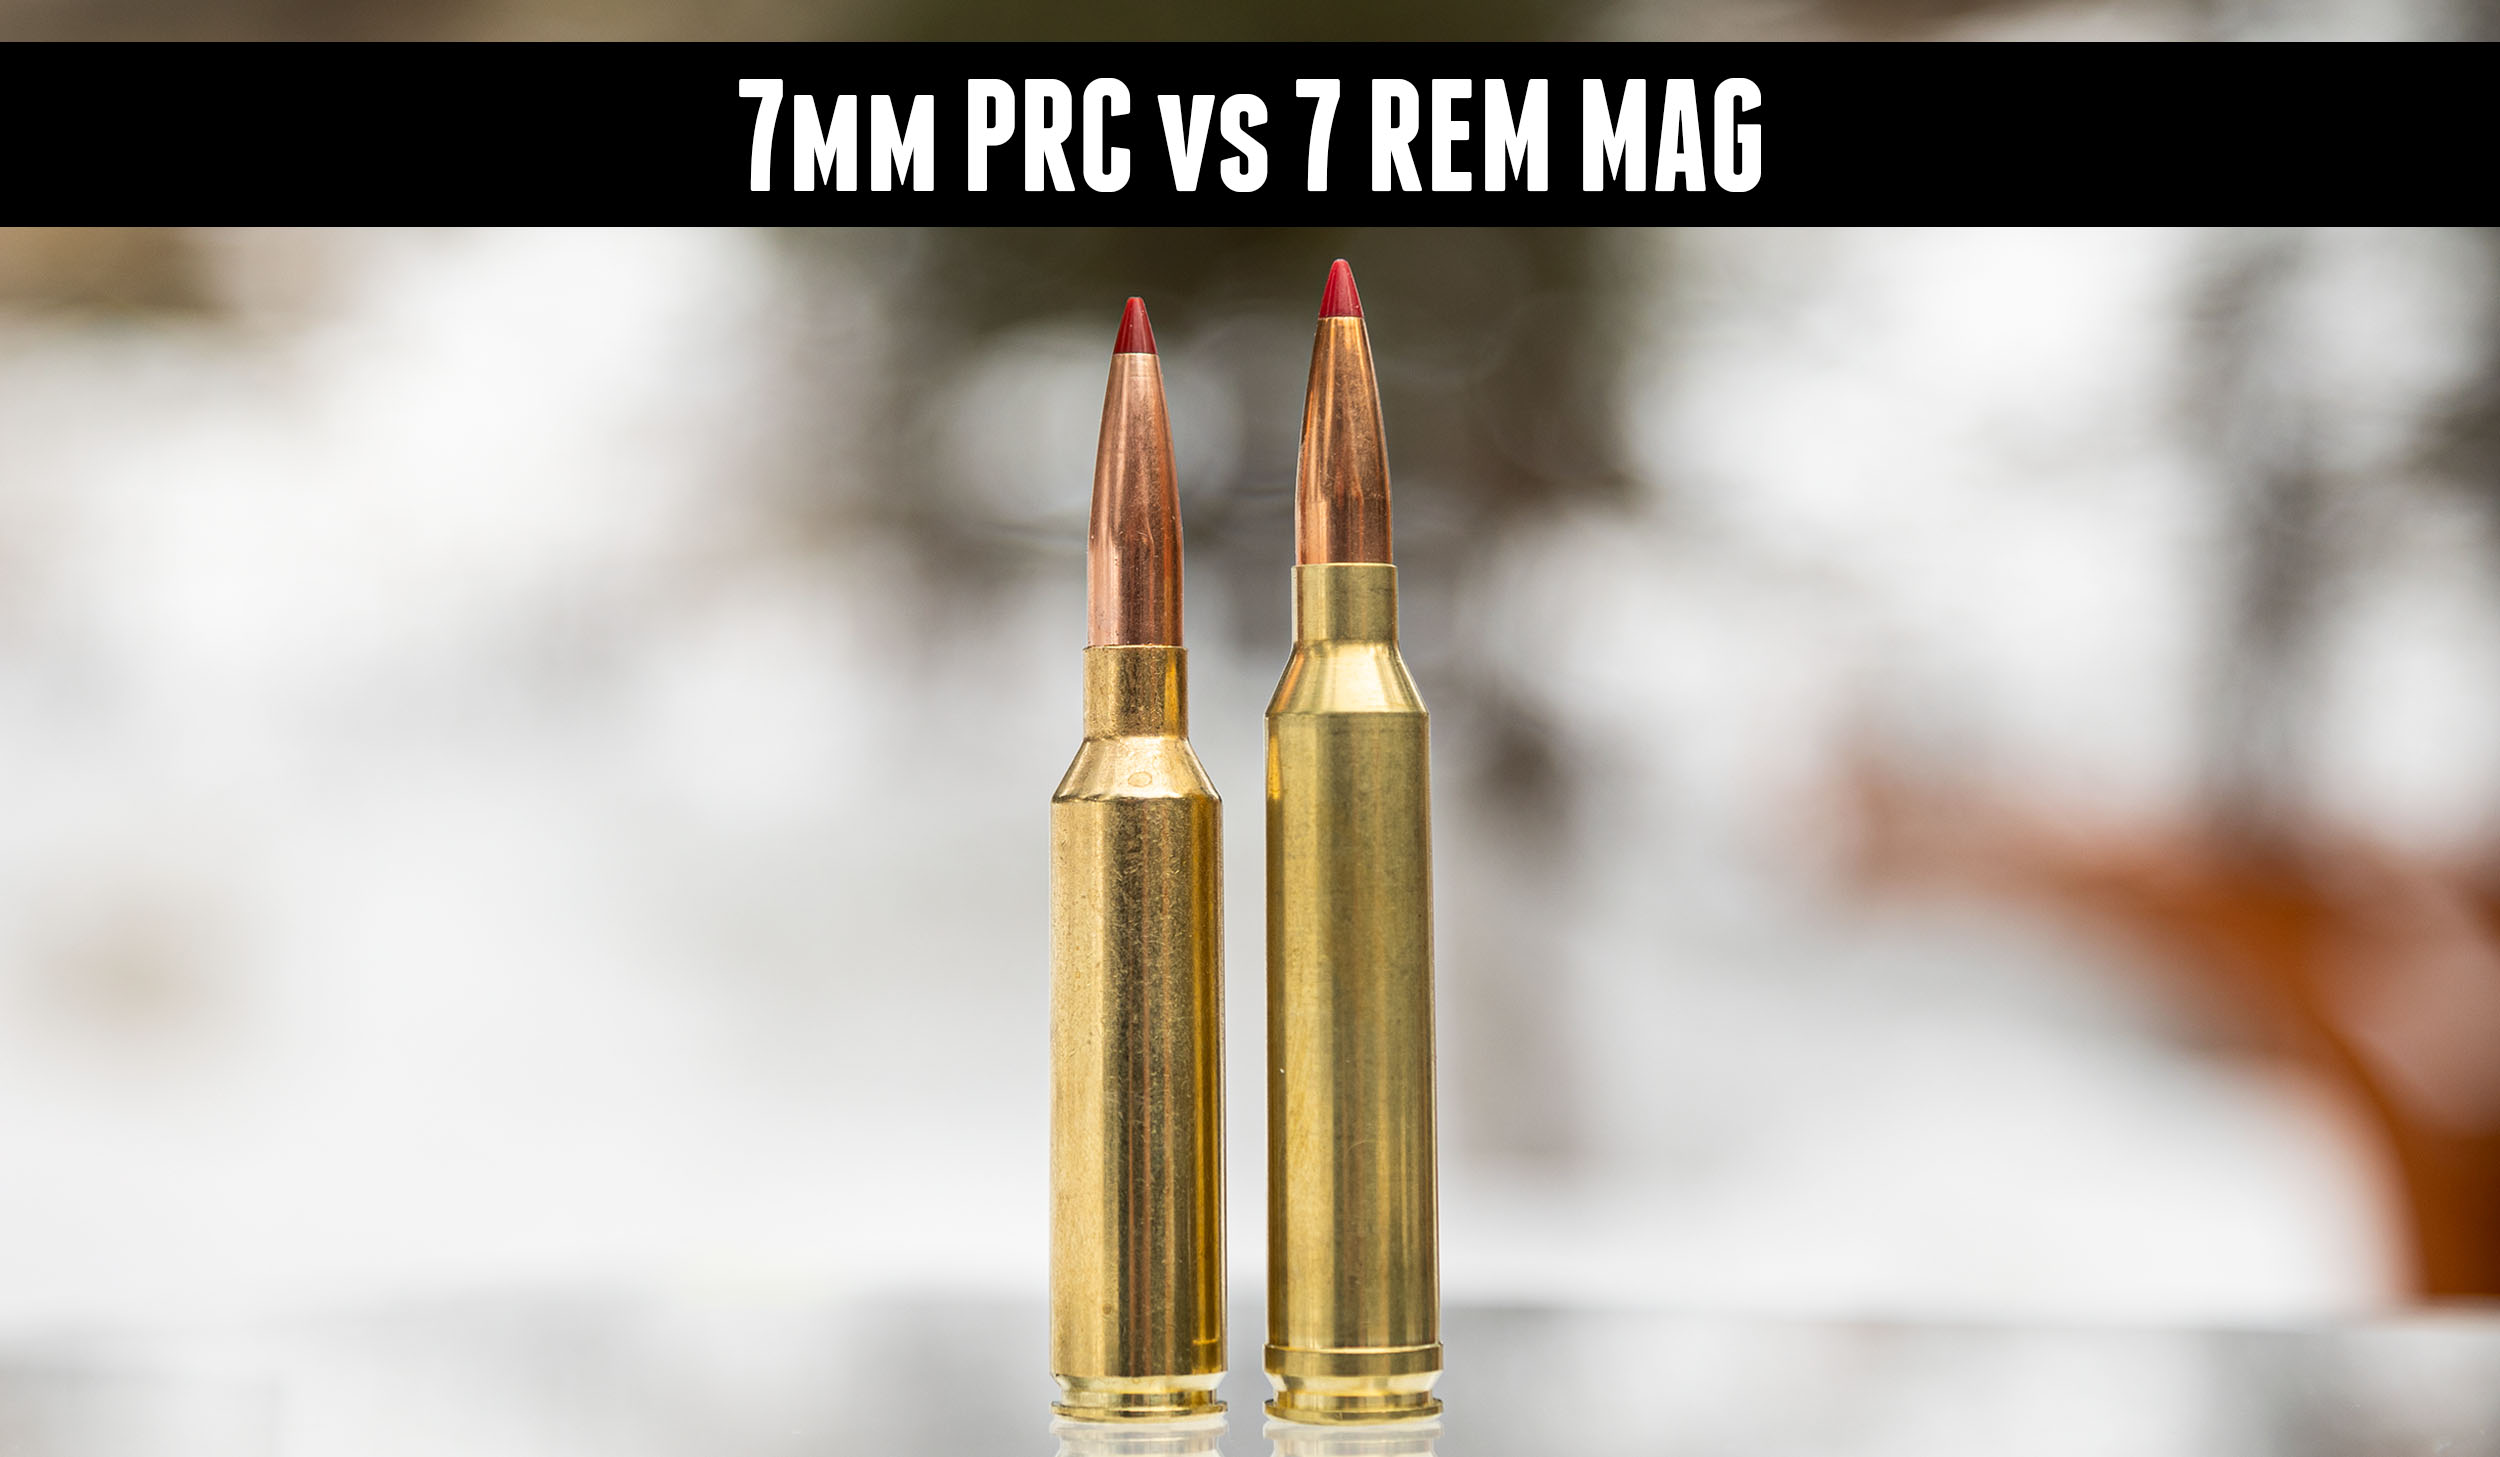 300 Win Mag Vs 7Mm Rem Mag Recoil: The Ultimate Showdown of Power